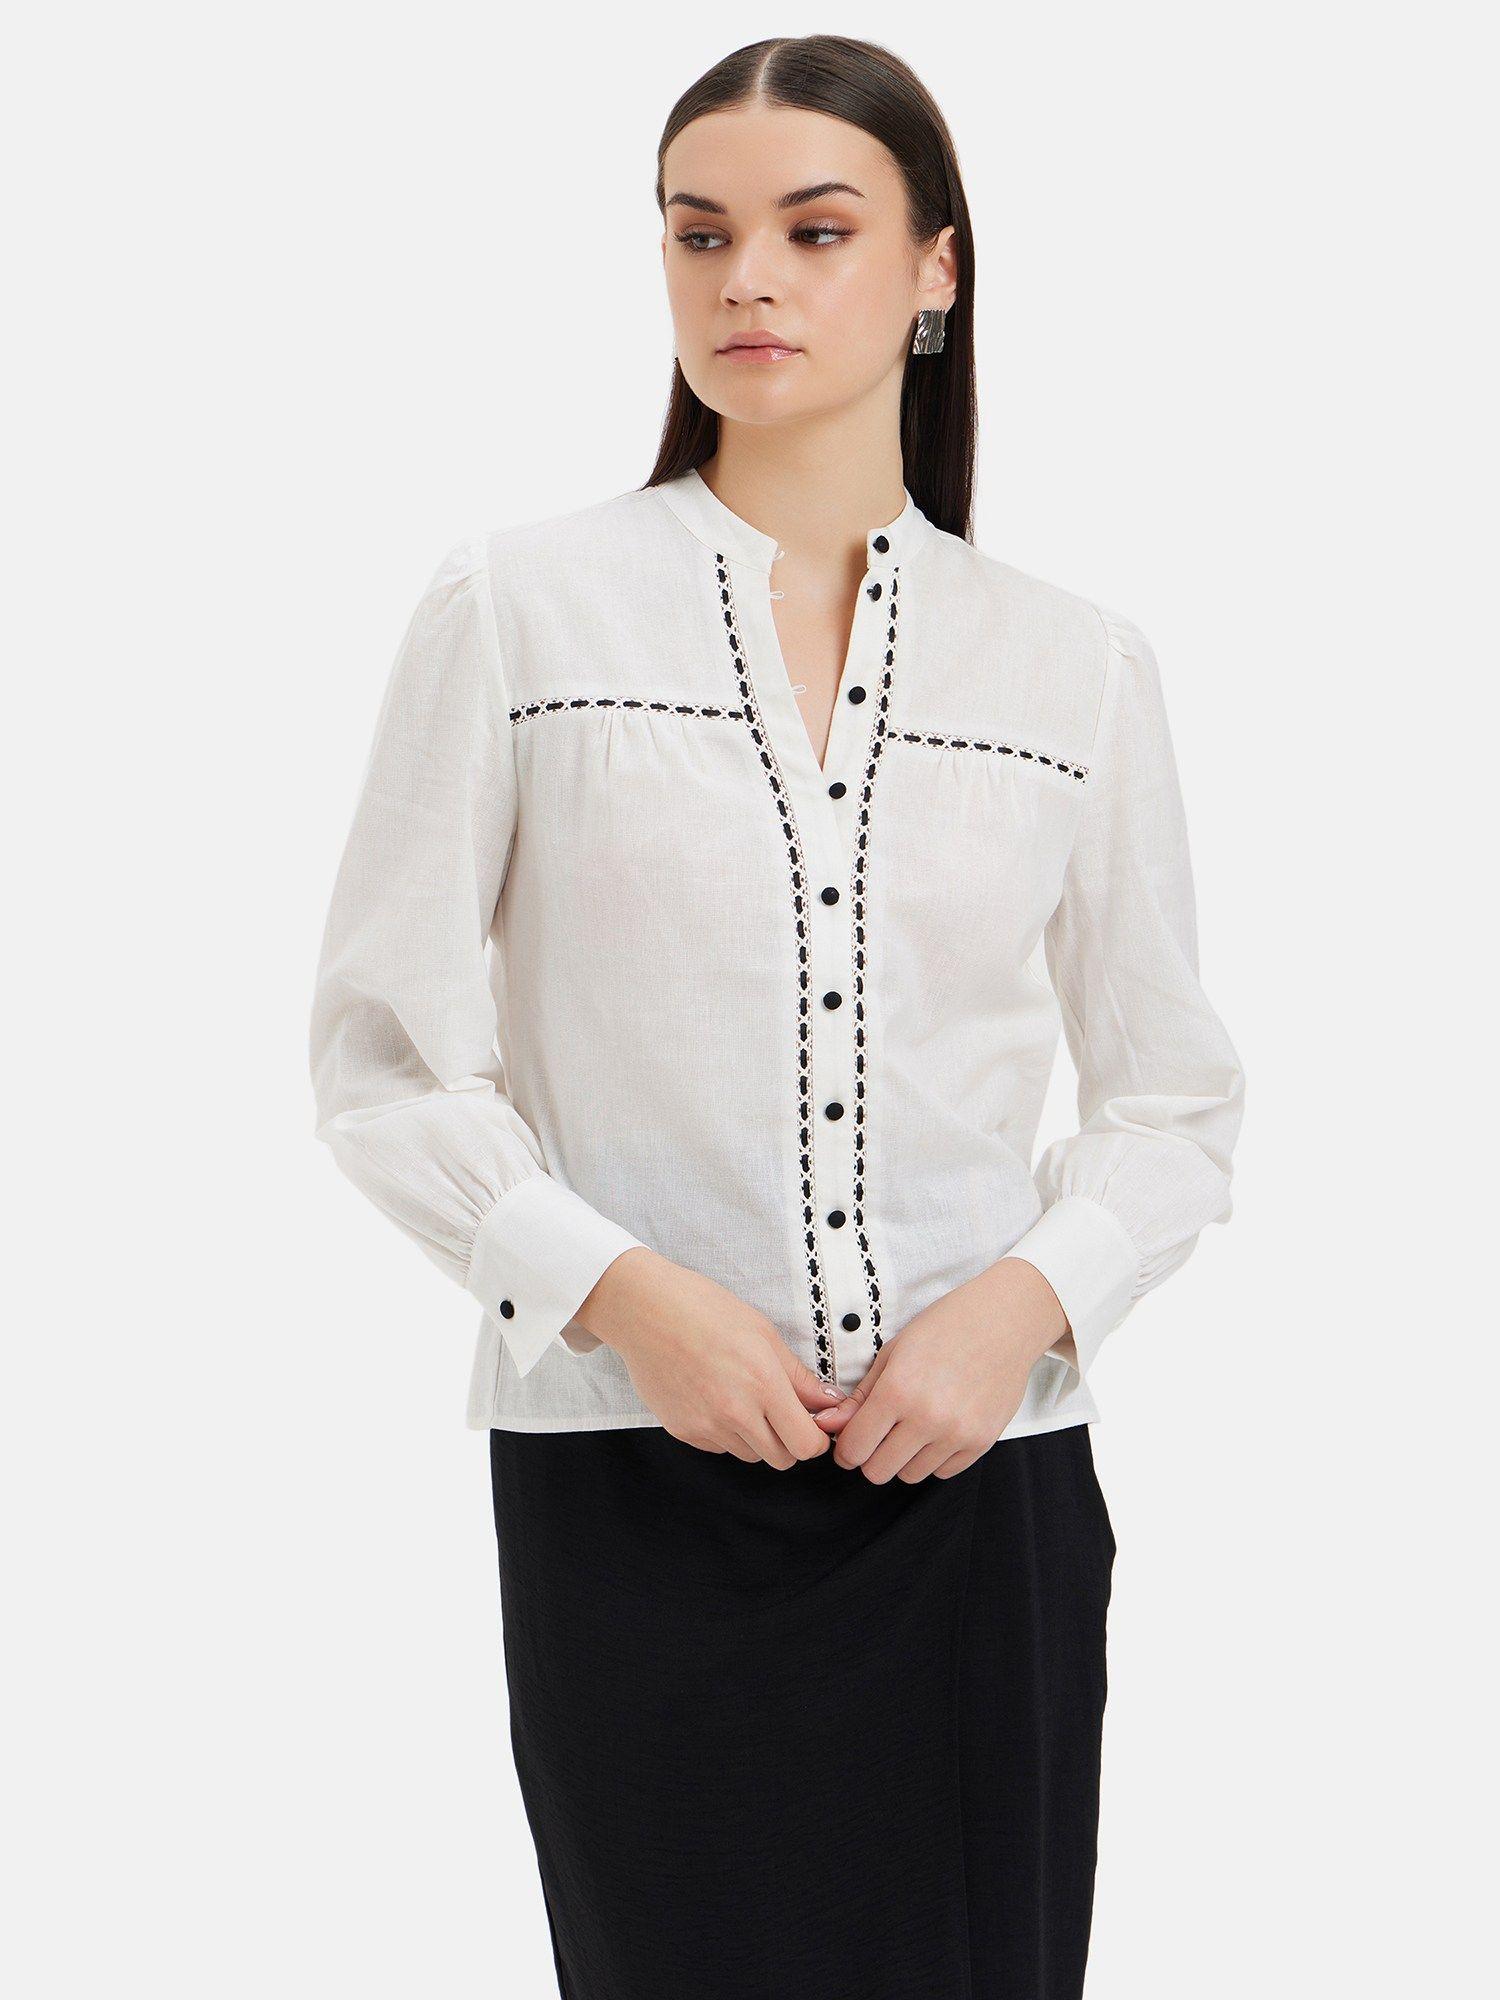 mandarin collar shirt with contrast embroidered highlighting